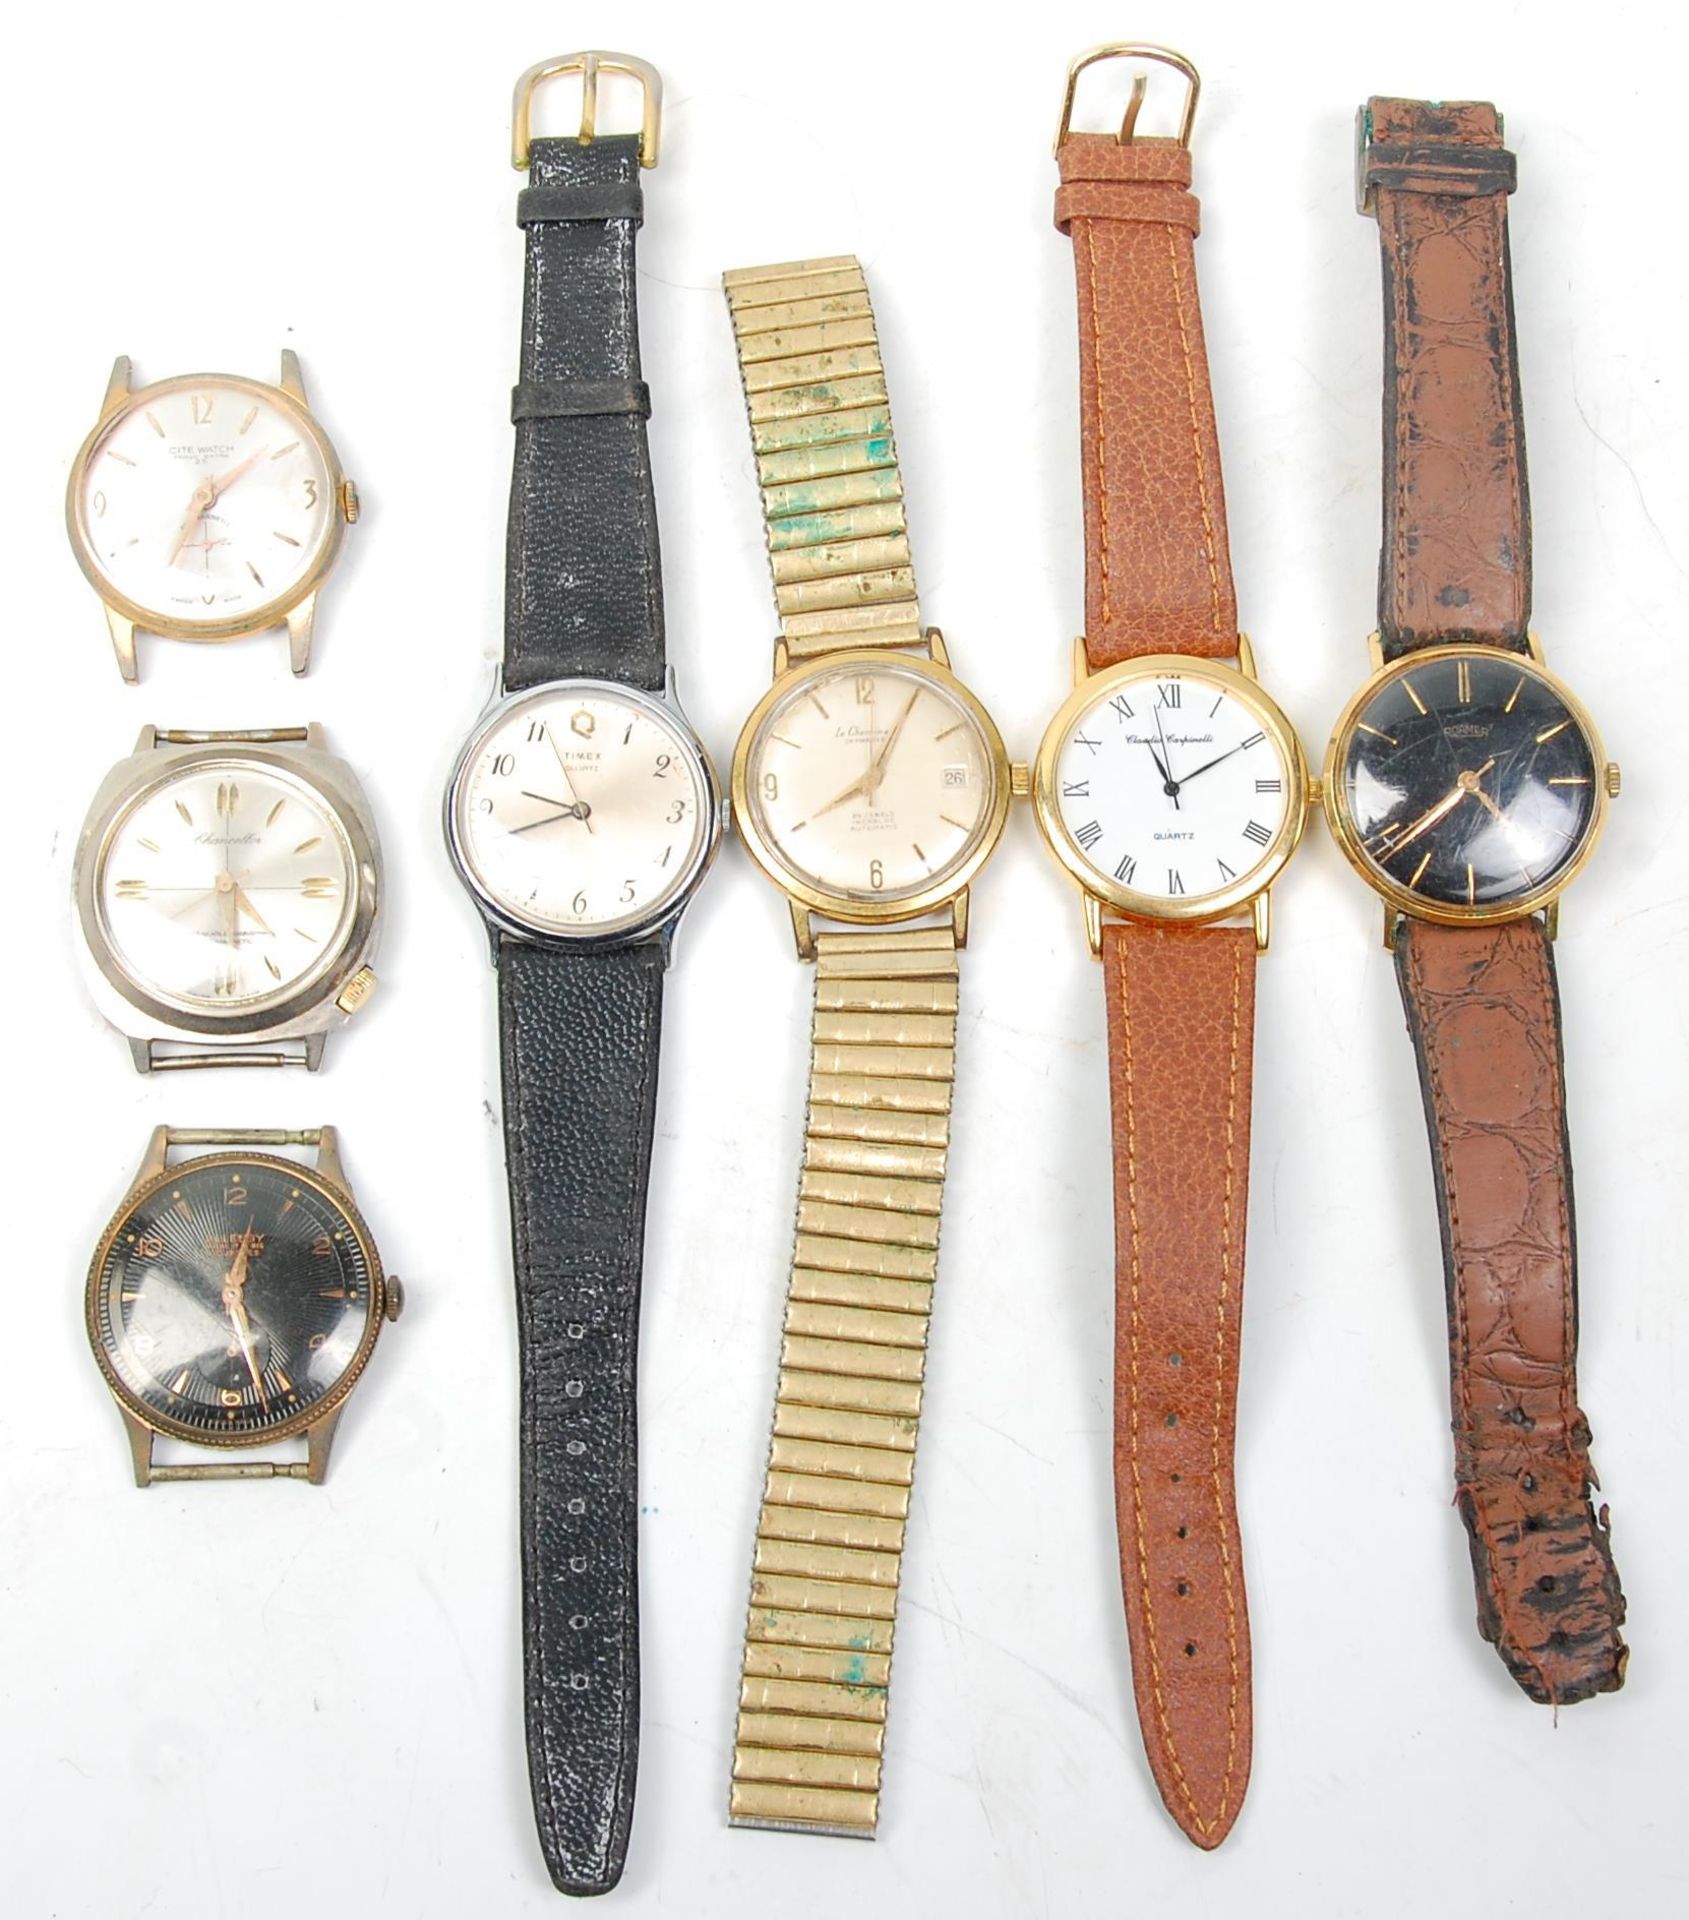 A group of seven vintage gentleman's wrist watches to include a Roamer watch having a round face